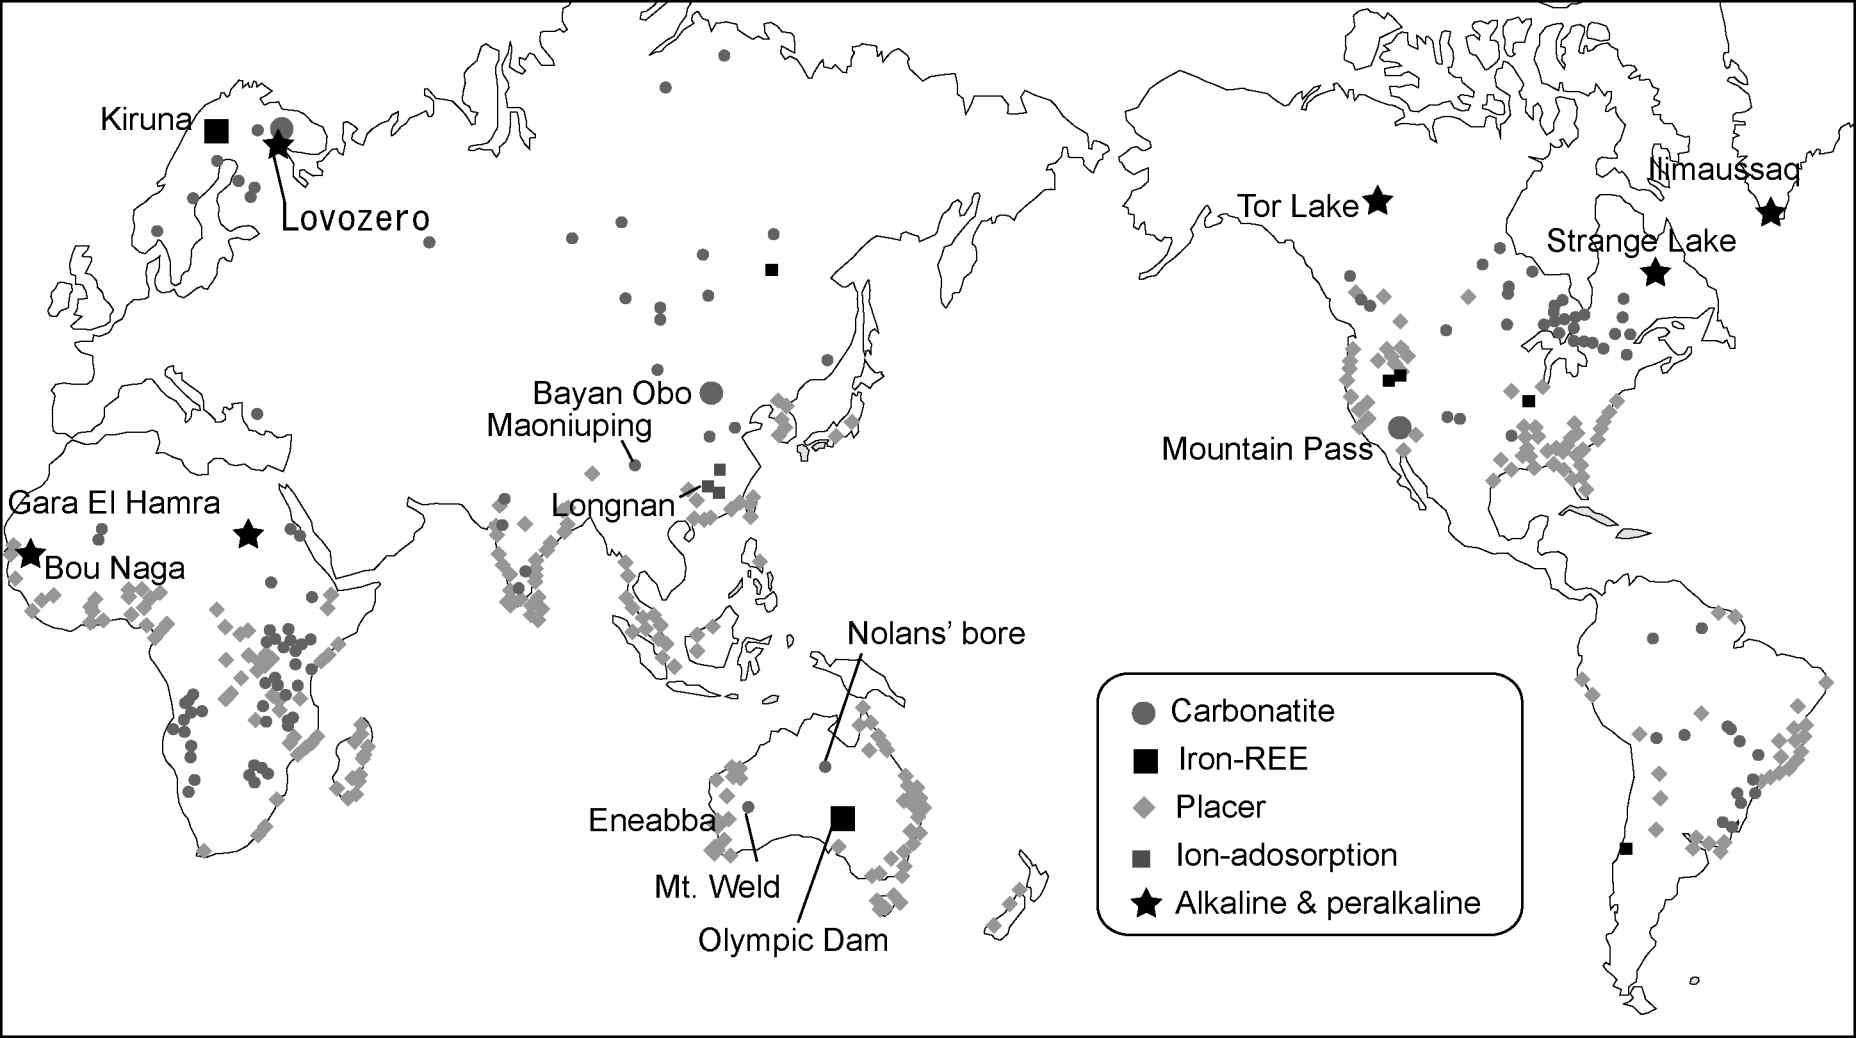 Identified rare earth elements deposits around the globe.